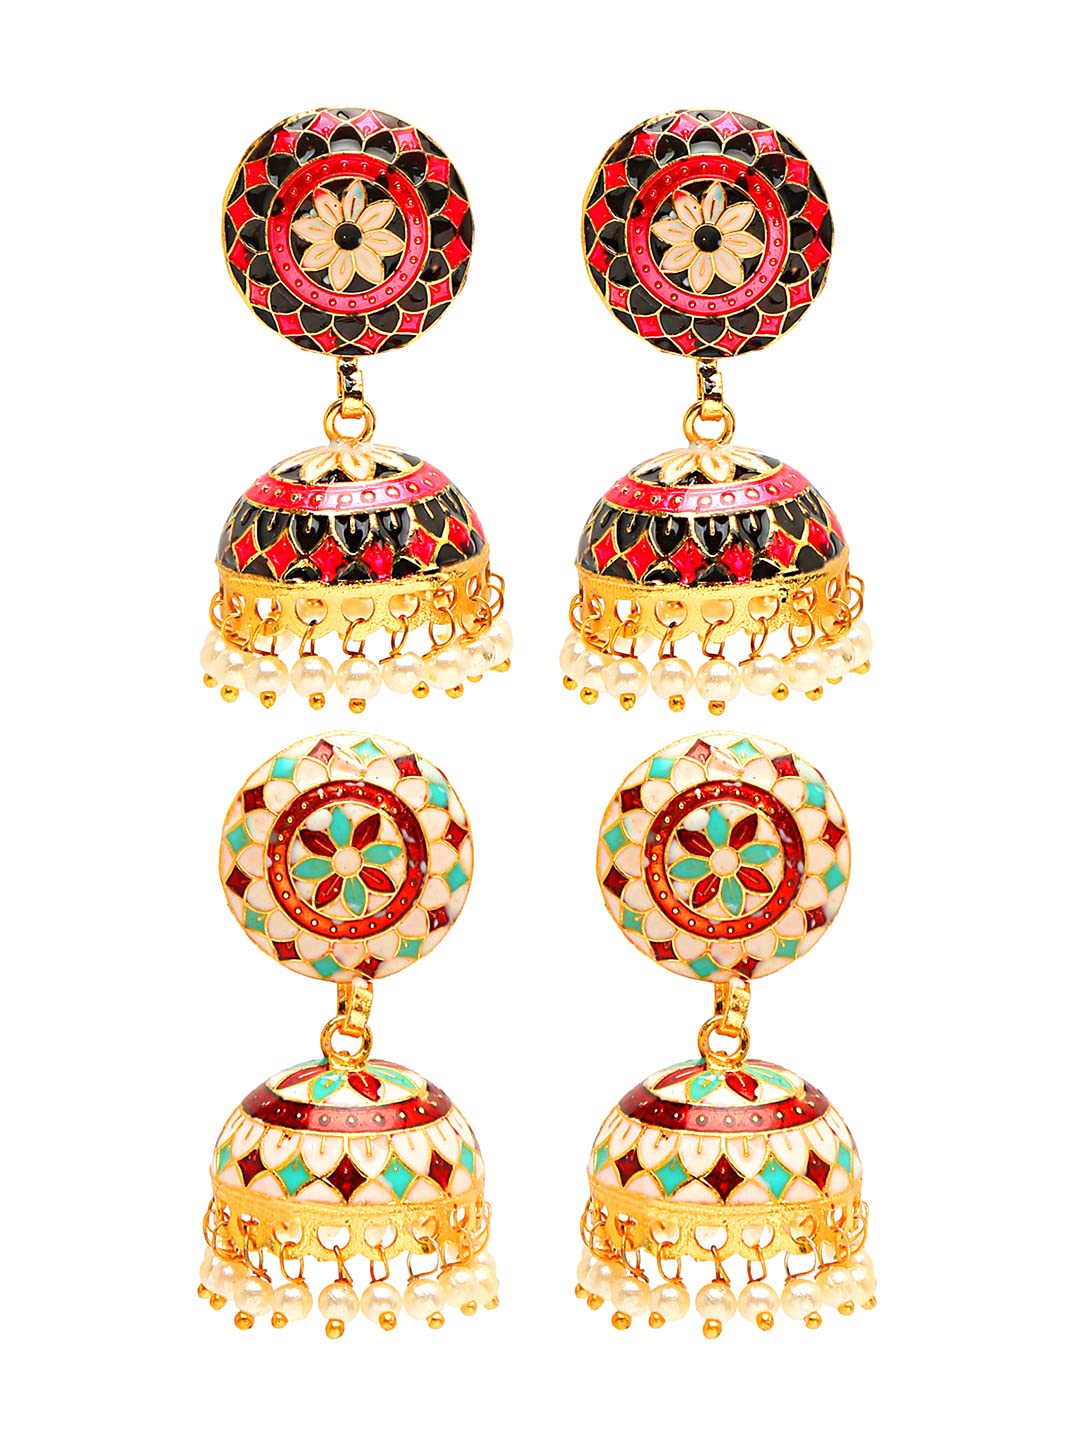 Yellow Chimes Meenakari Jumka Earrings with Ethnic Design Gold Plated Traditional Beads Combo of 2 pair for Women and Girls